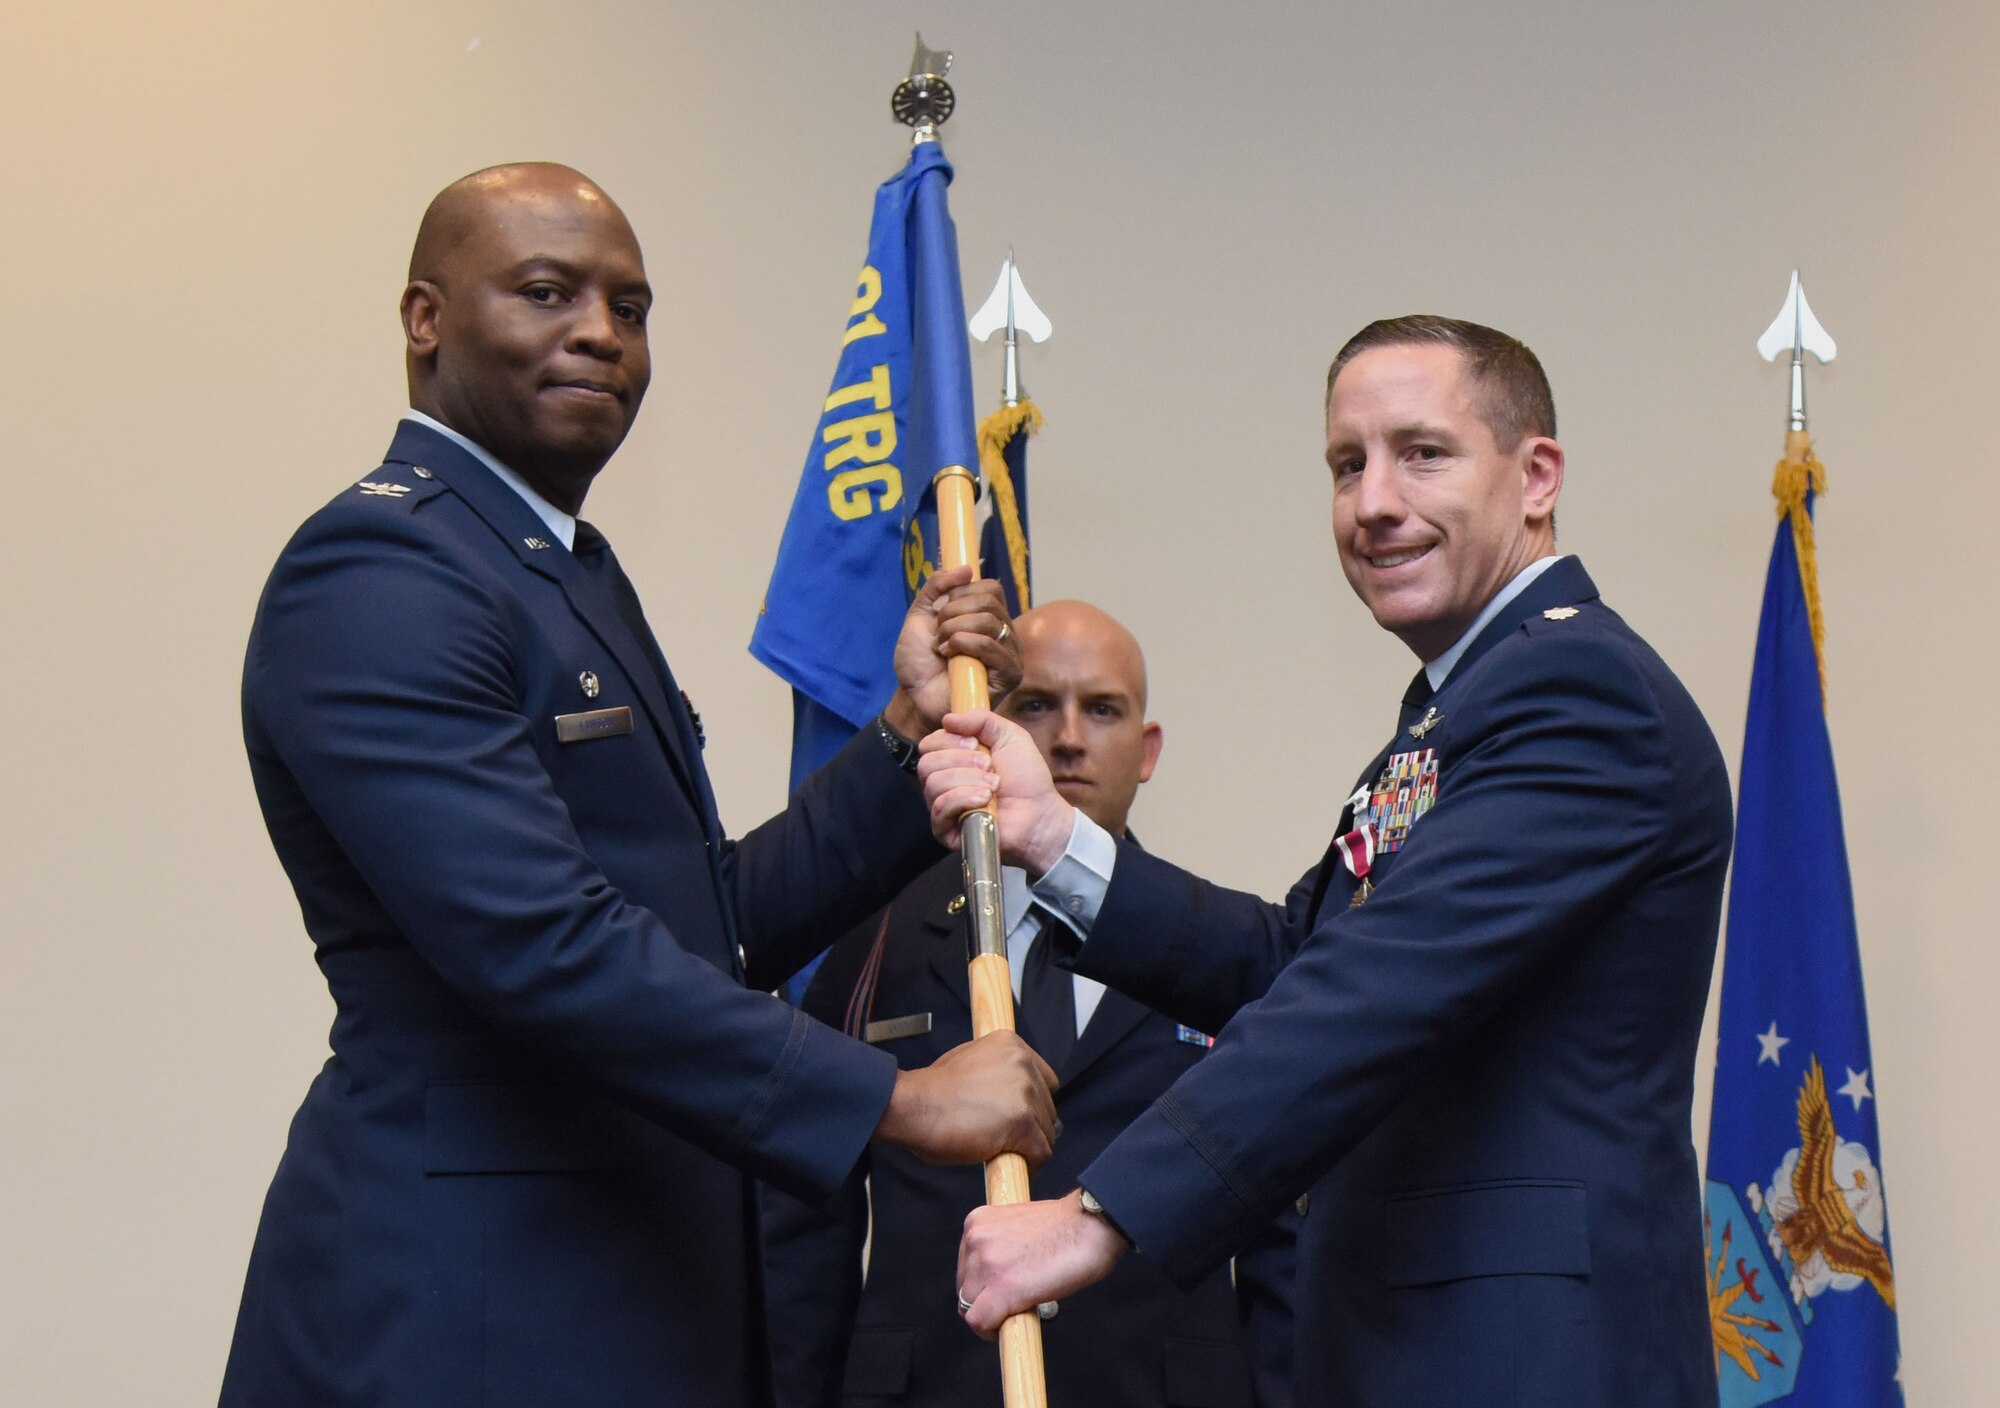 338th TRS welcomes new commander > Keesler Air Force Base 